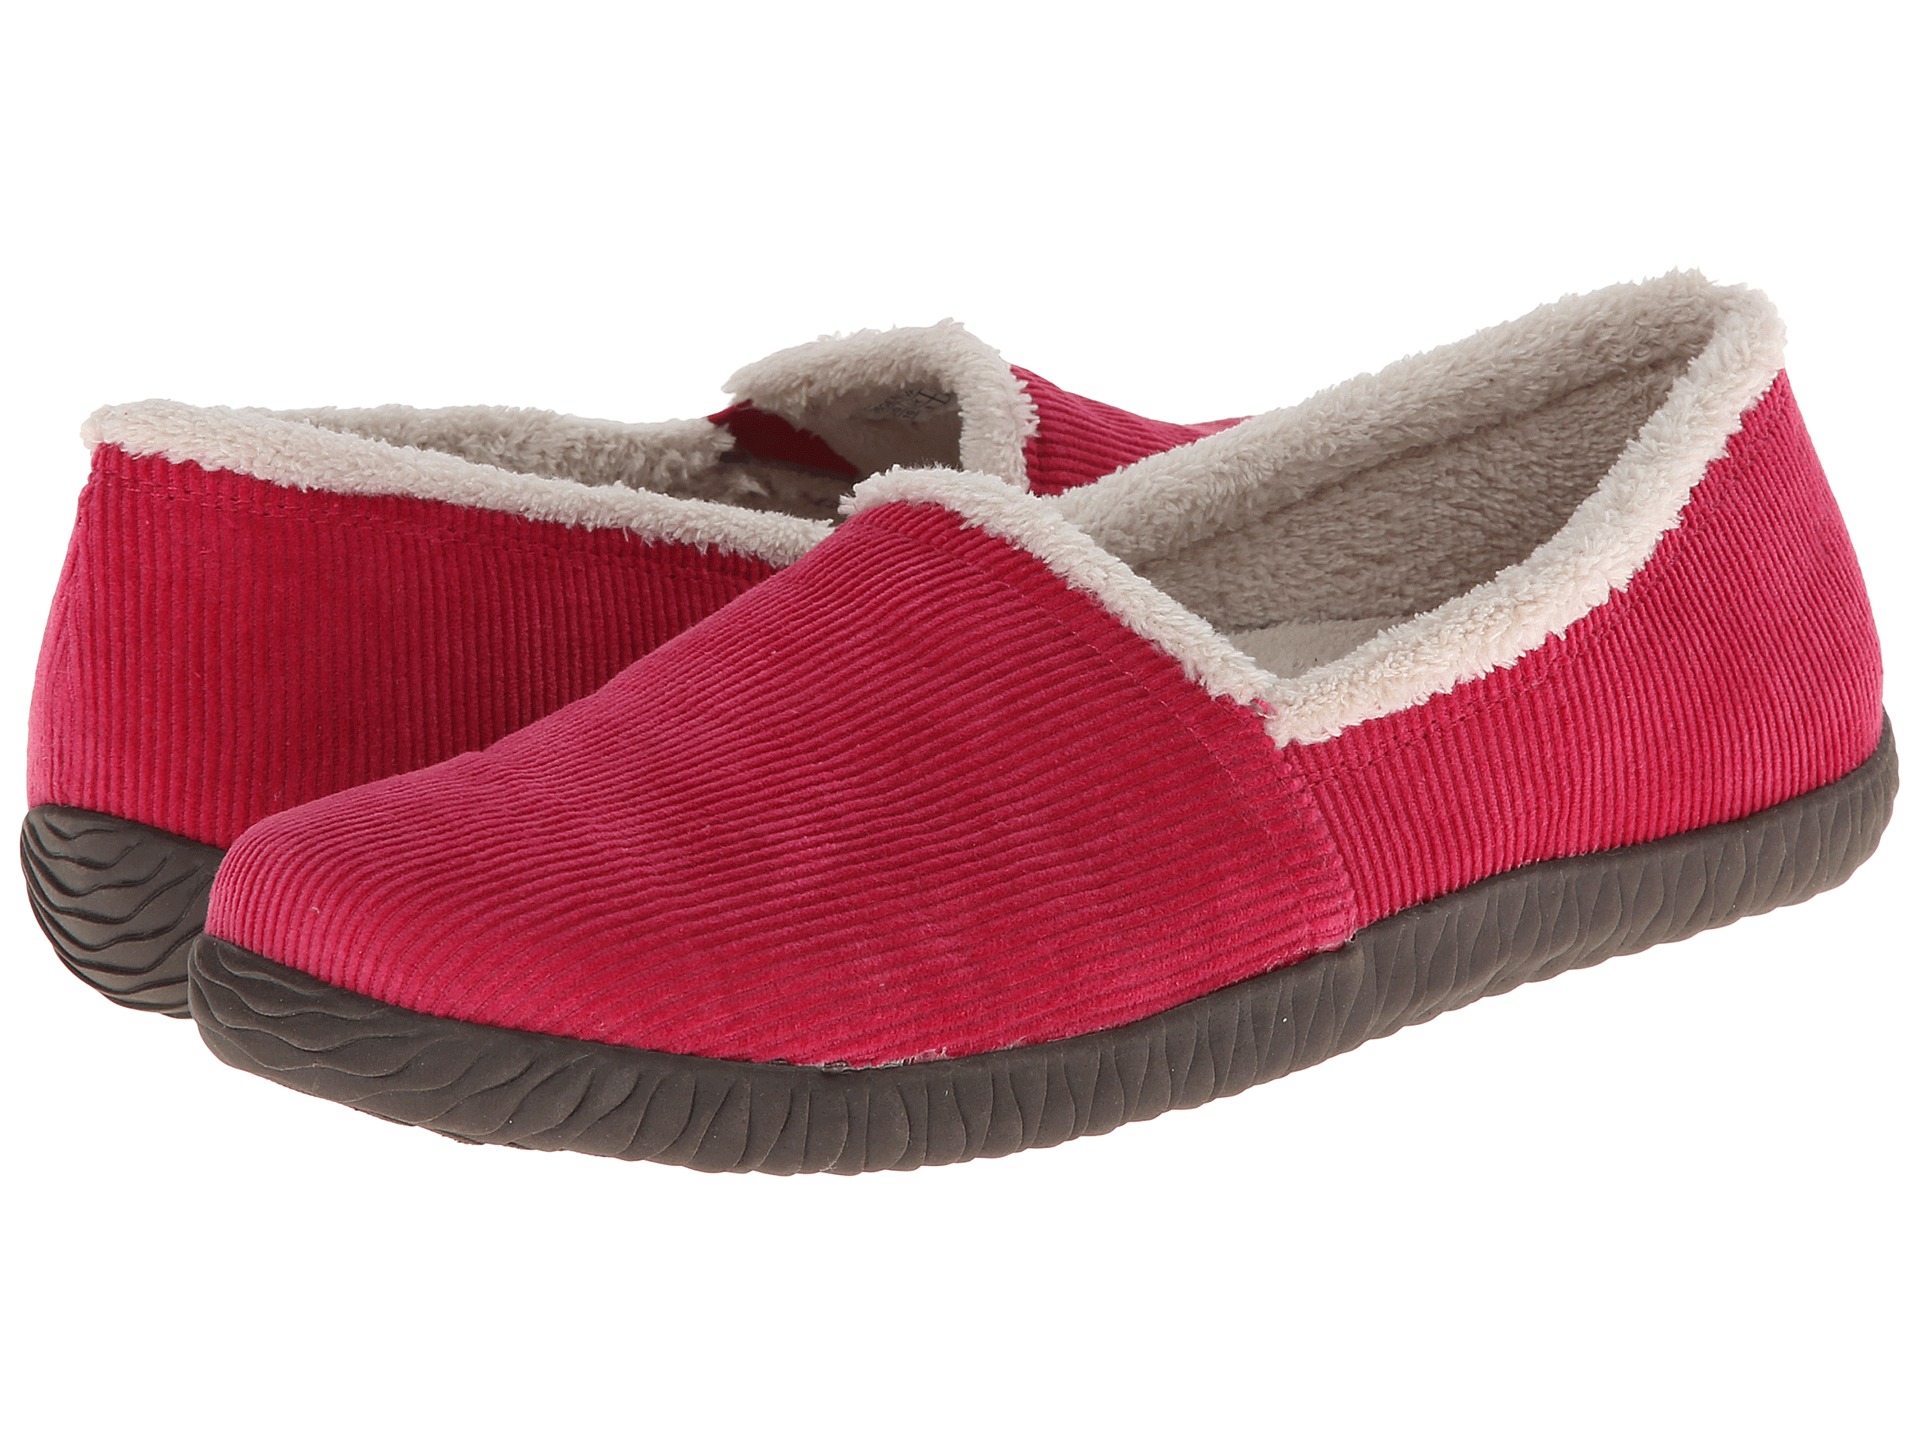 Vionic With Orthaheel Technology Geneva Slipper Pink | Shipped Free at ...